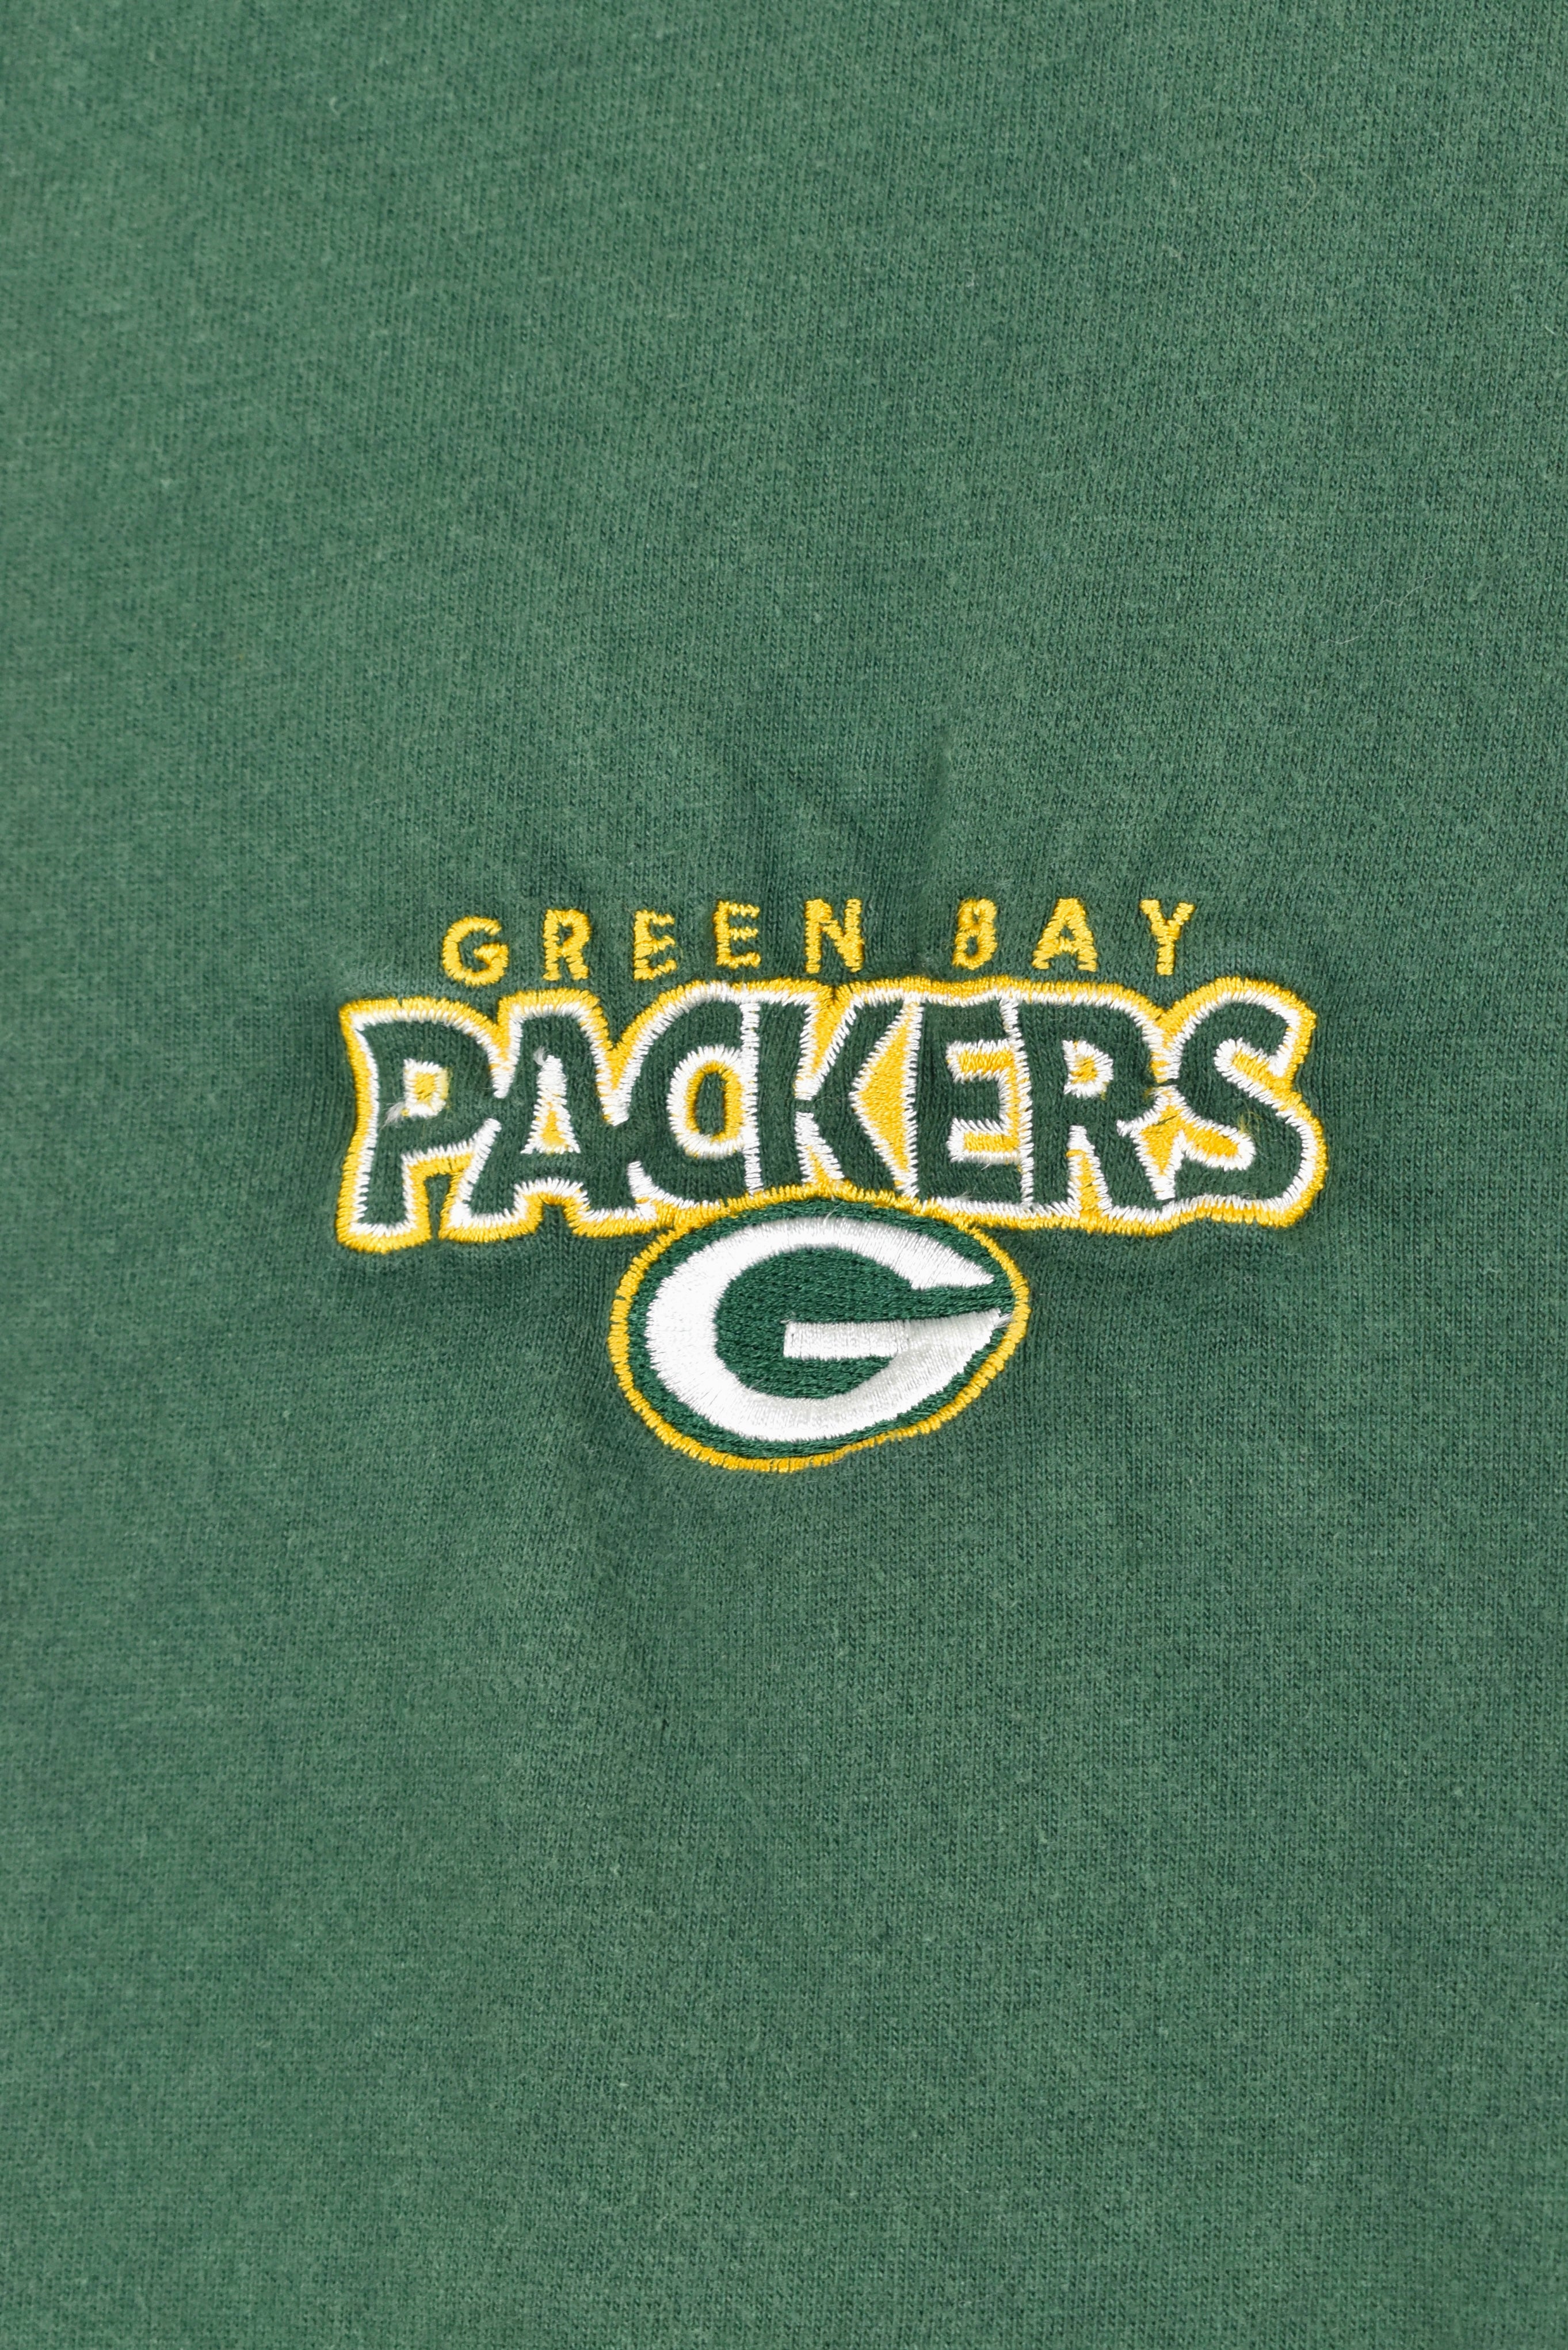 Vintage Green Bay Packers shirt, short sleeve green embroidered tee - AU XL PRO SPORT